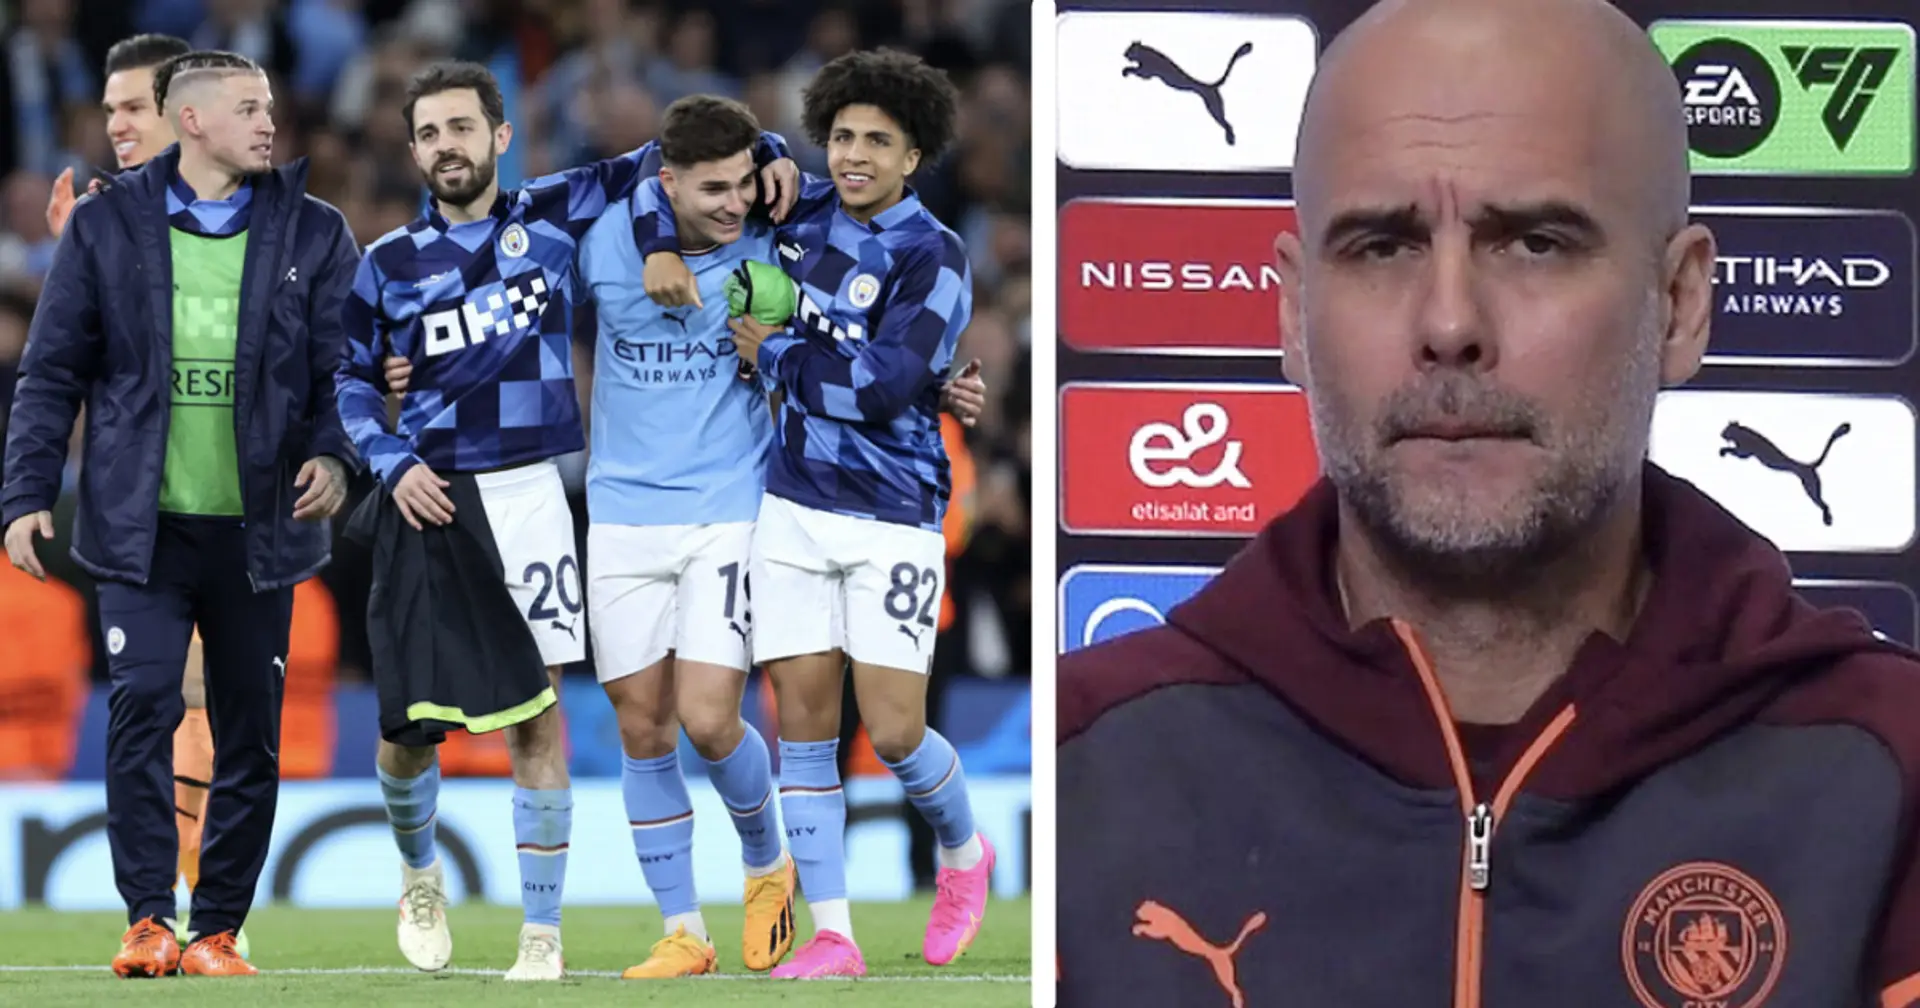 Barcelona could sign Man City midfielder who scored in Champions League this season (reliability: 5 stars)